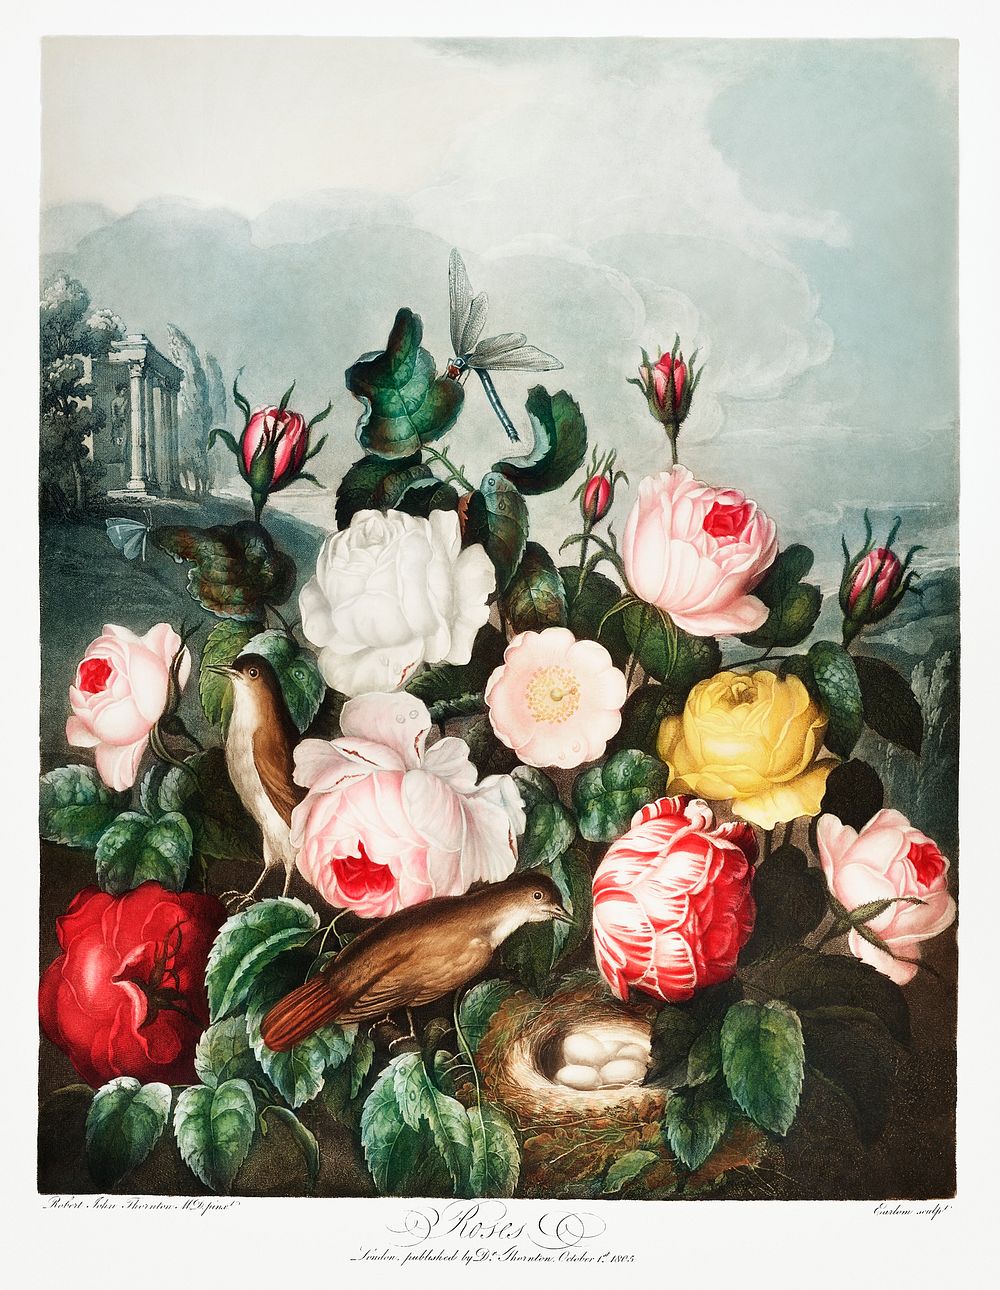 Roses from The Temple of Flora (1807) by Robert John Thornton. Original from Biodiversity Heritage Library. Digitally…